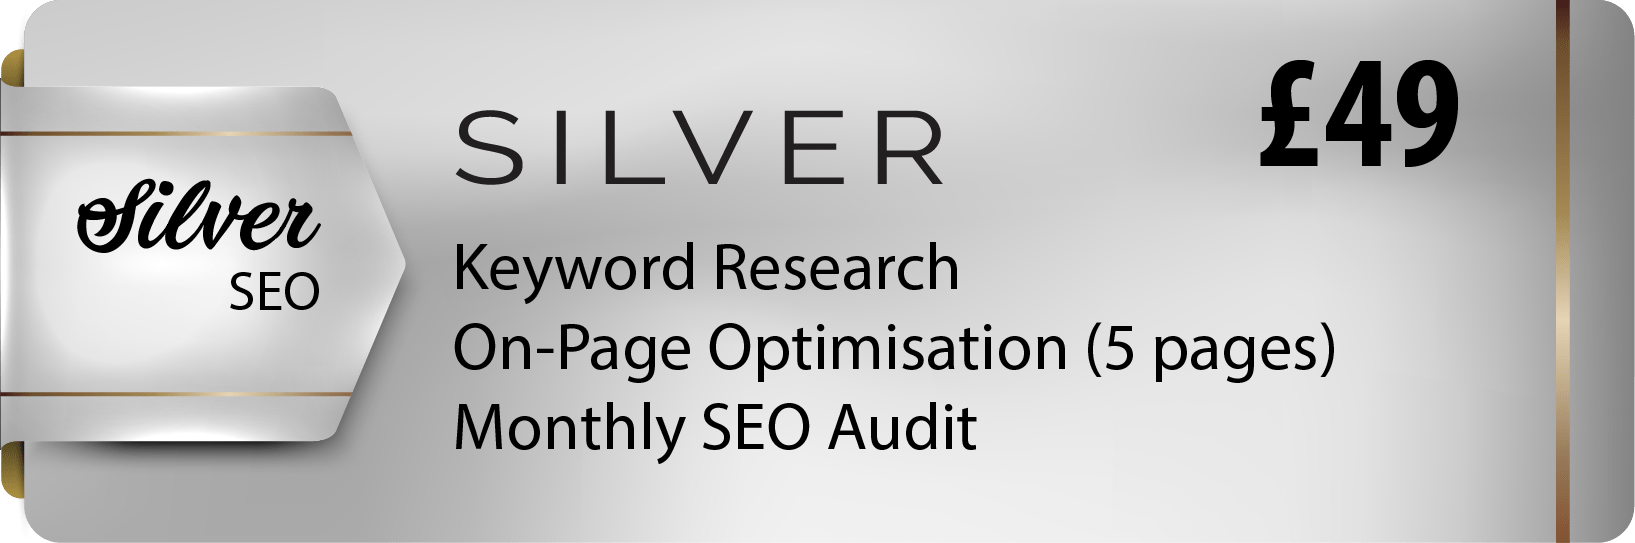 silver value for SEO package for websites based in Hampshire